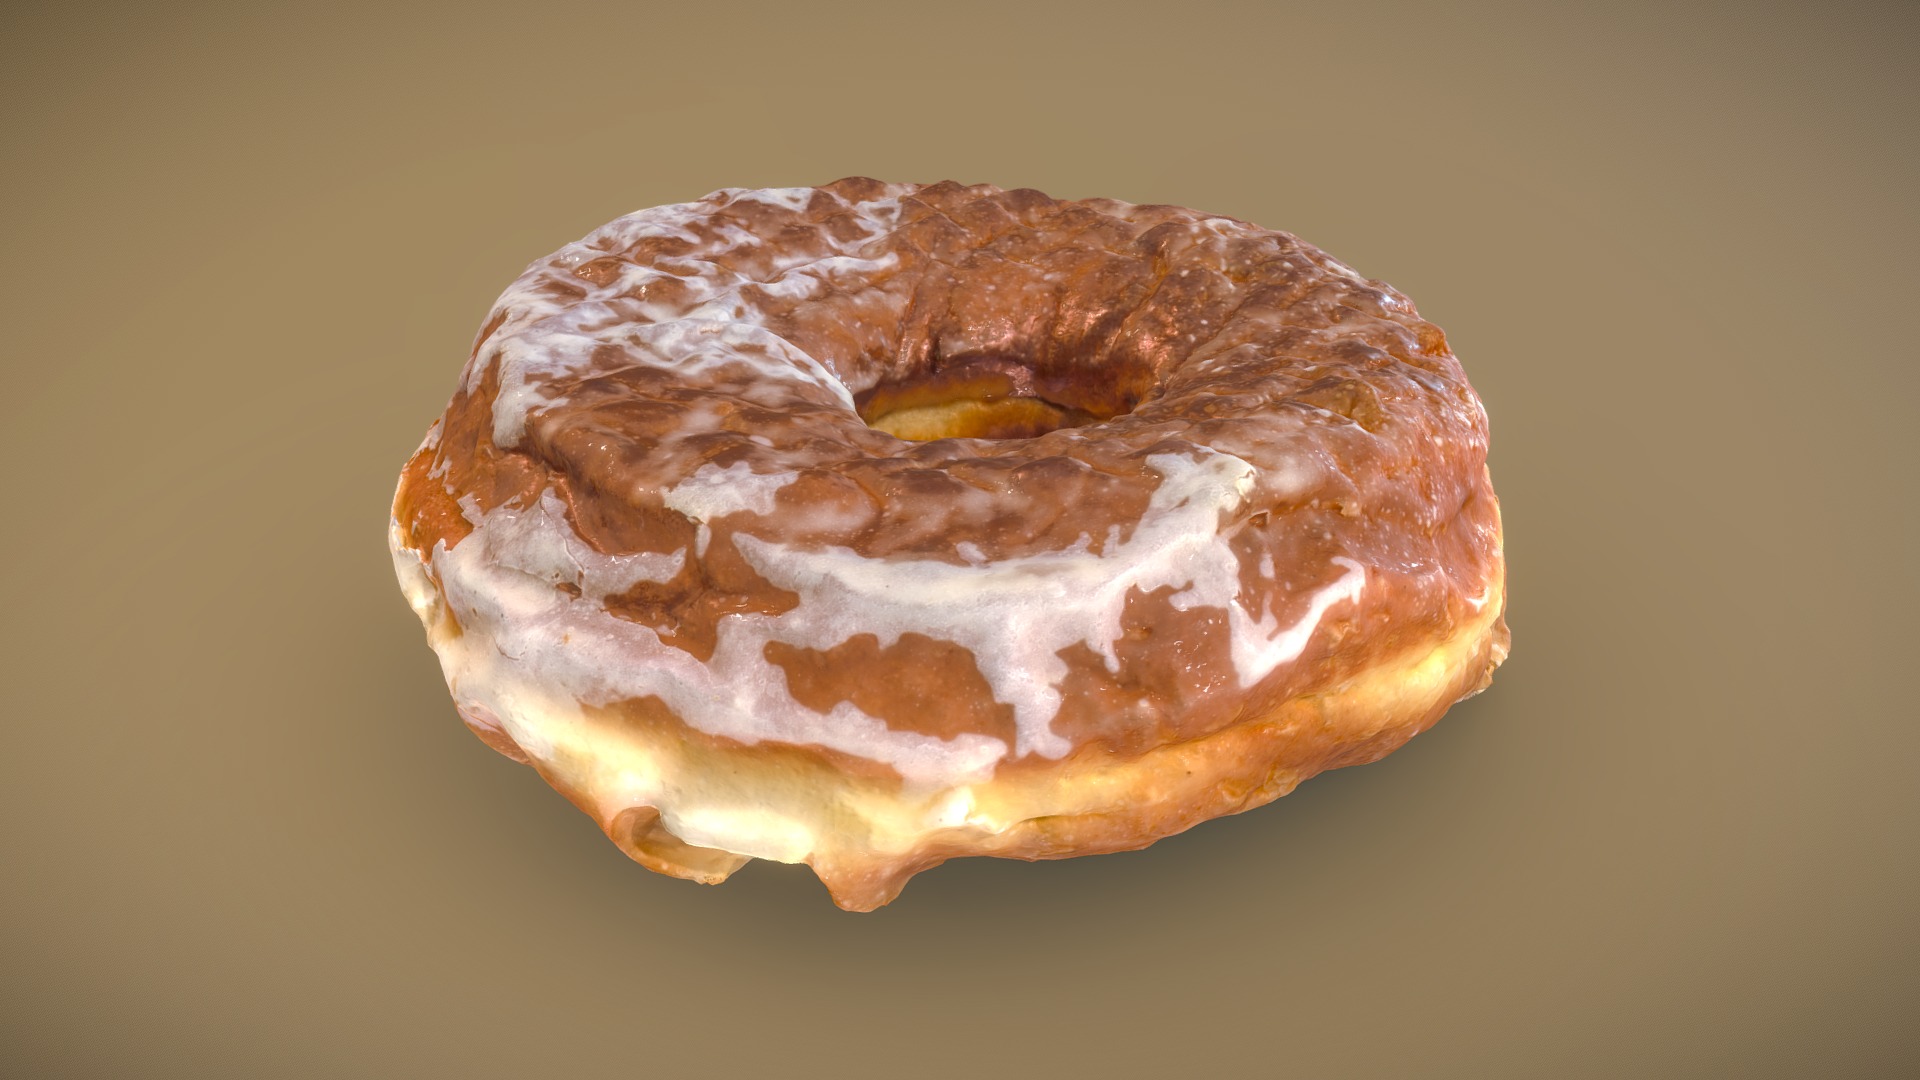 3D model Doughnut Plant Vanilla Bean - This is a 3D model of the Doughnut Plant Vanilla Bean. The 3D model is about a close up of a donut.